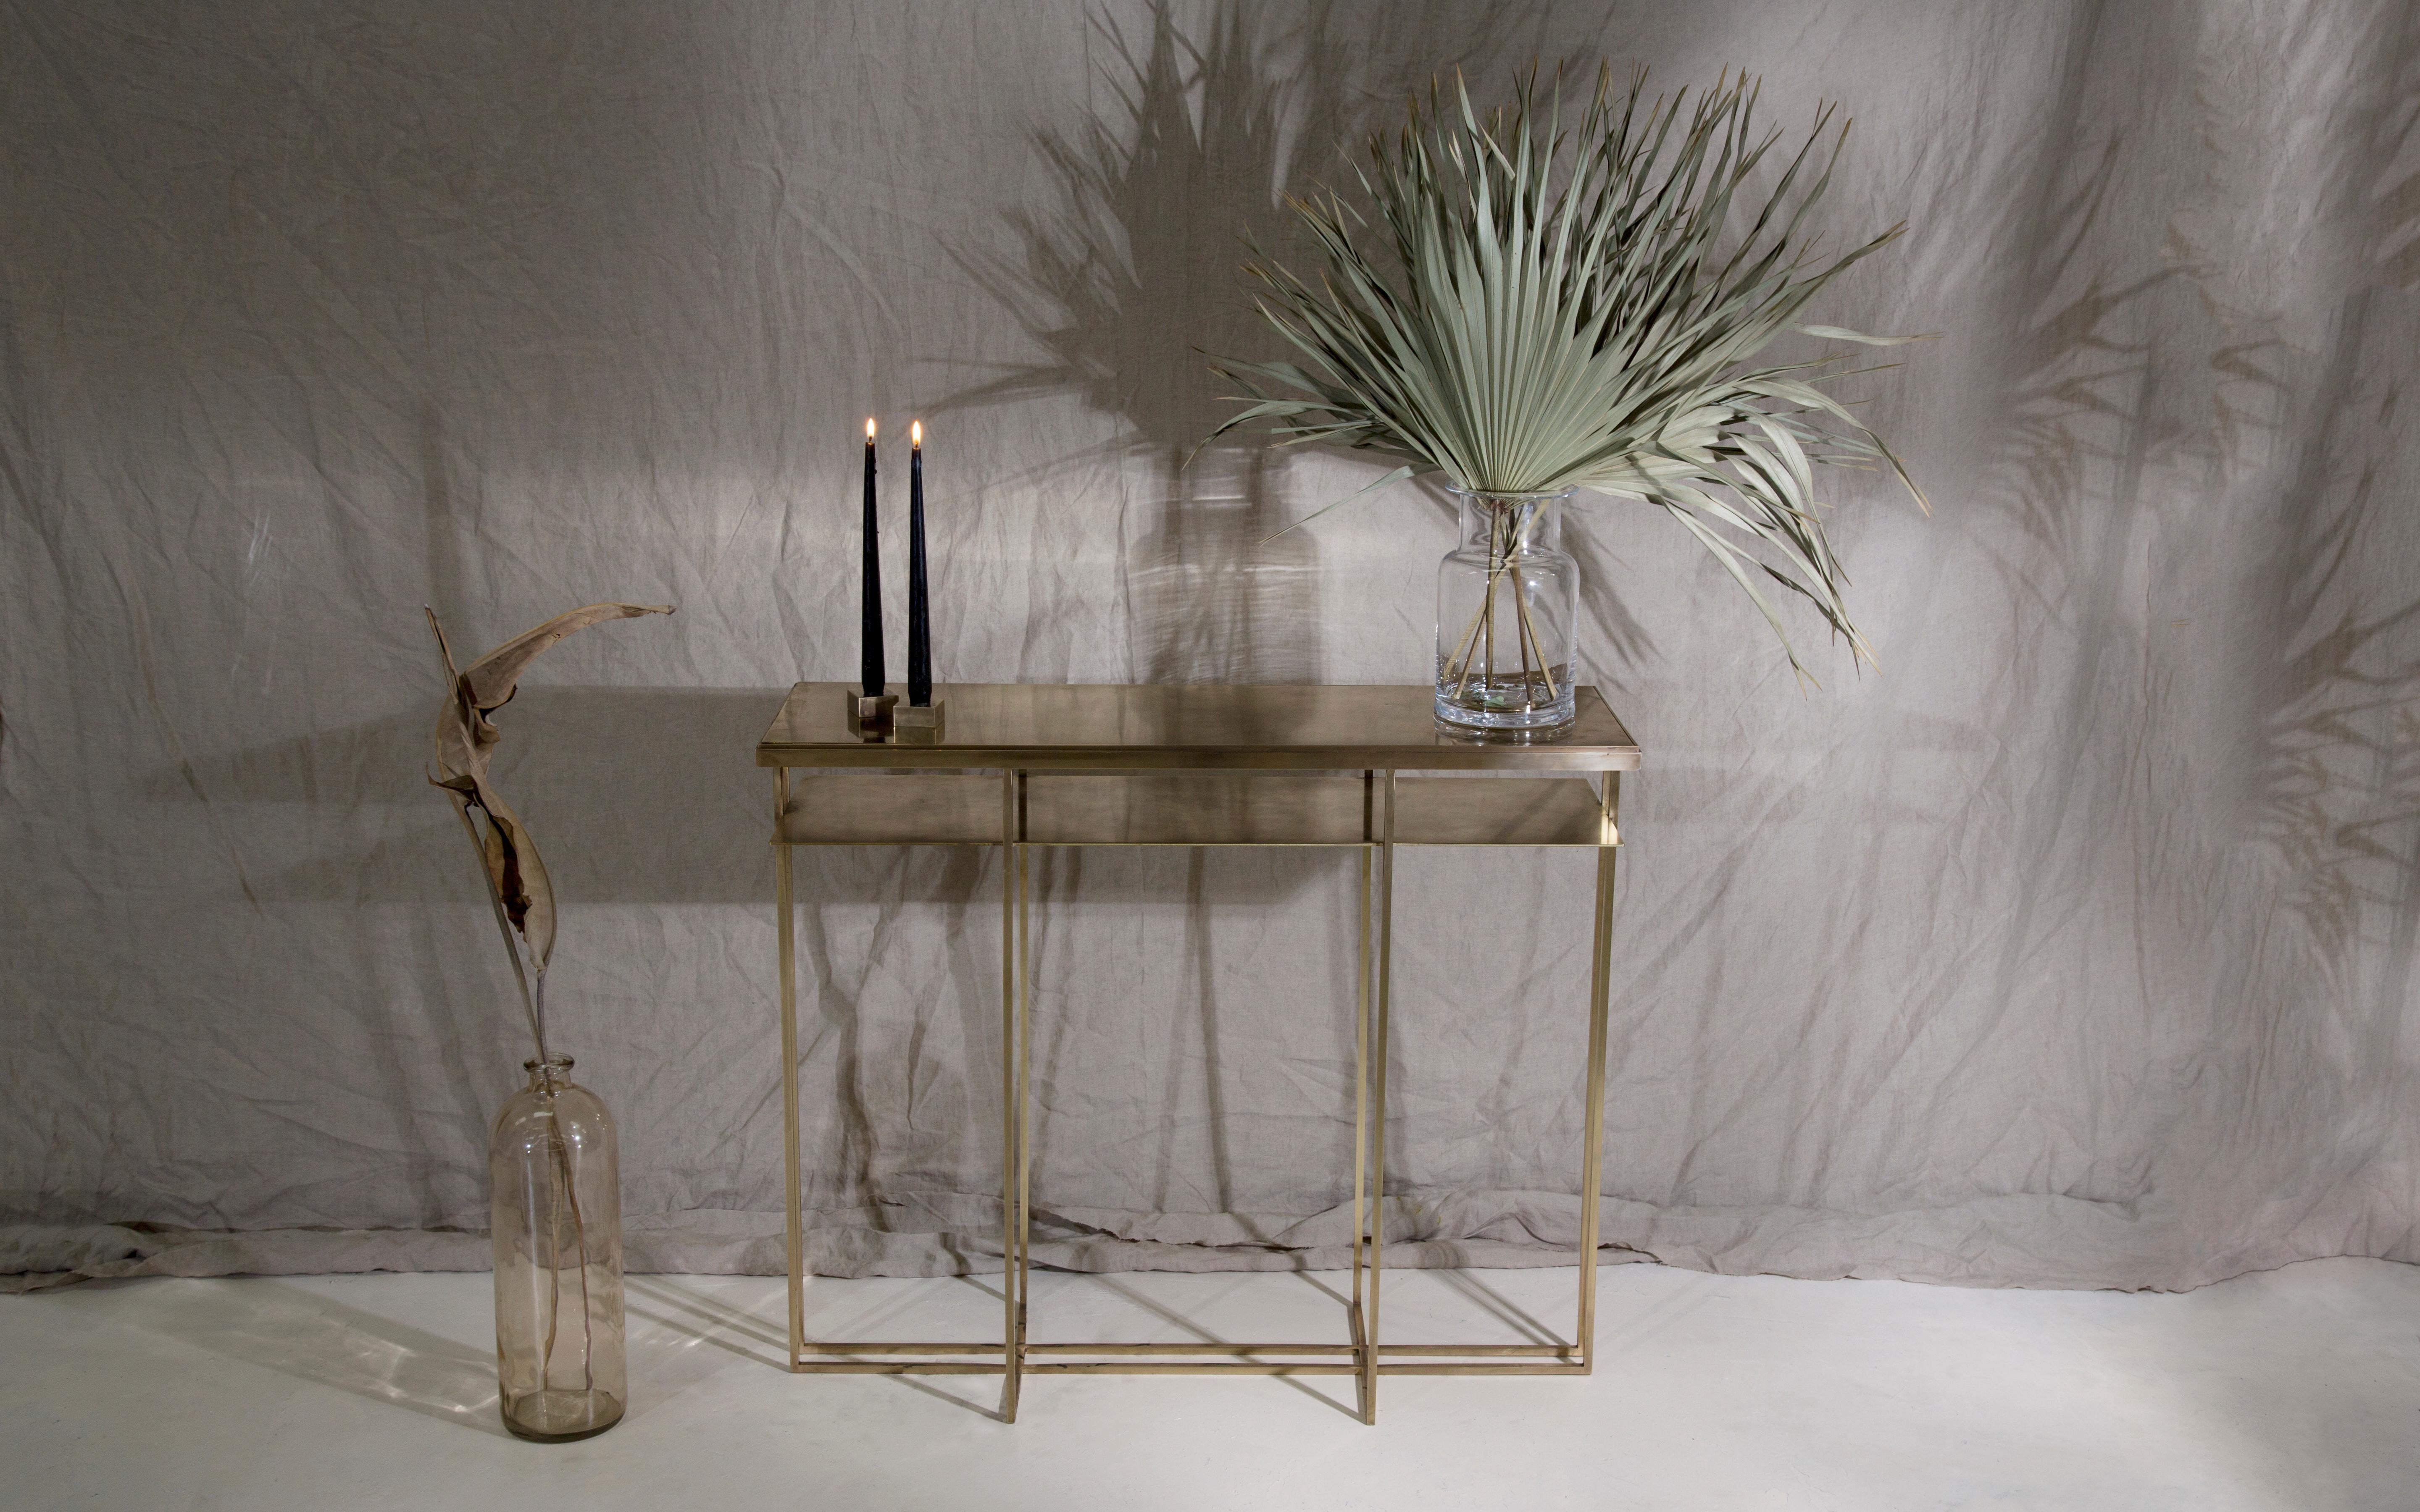 A side table in patinated brass, with a polished brass trim. Hand crafted in the North to order. Custom sizes and finishes are available.

Measures: 71cm (length) x 25cm (width) x 55cm (height). 
Custom sizes available.

Made to order in 12